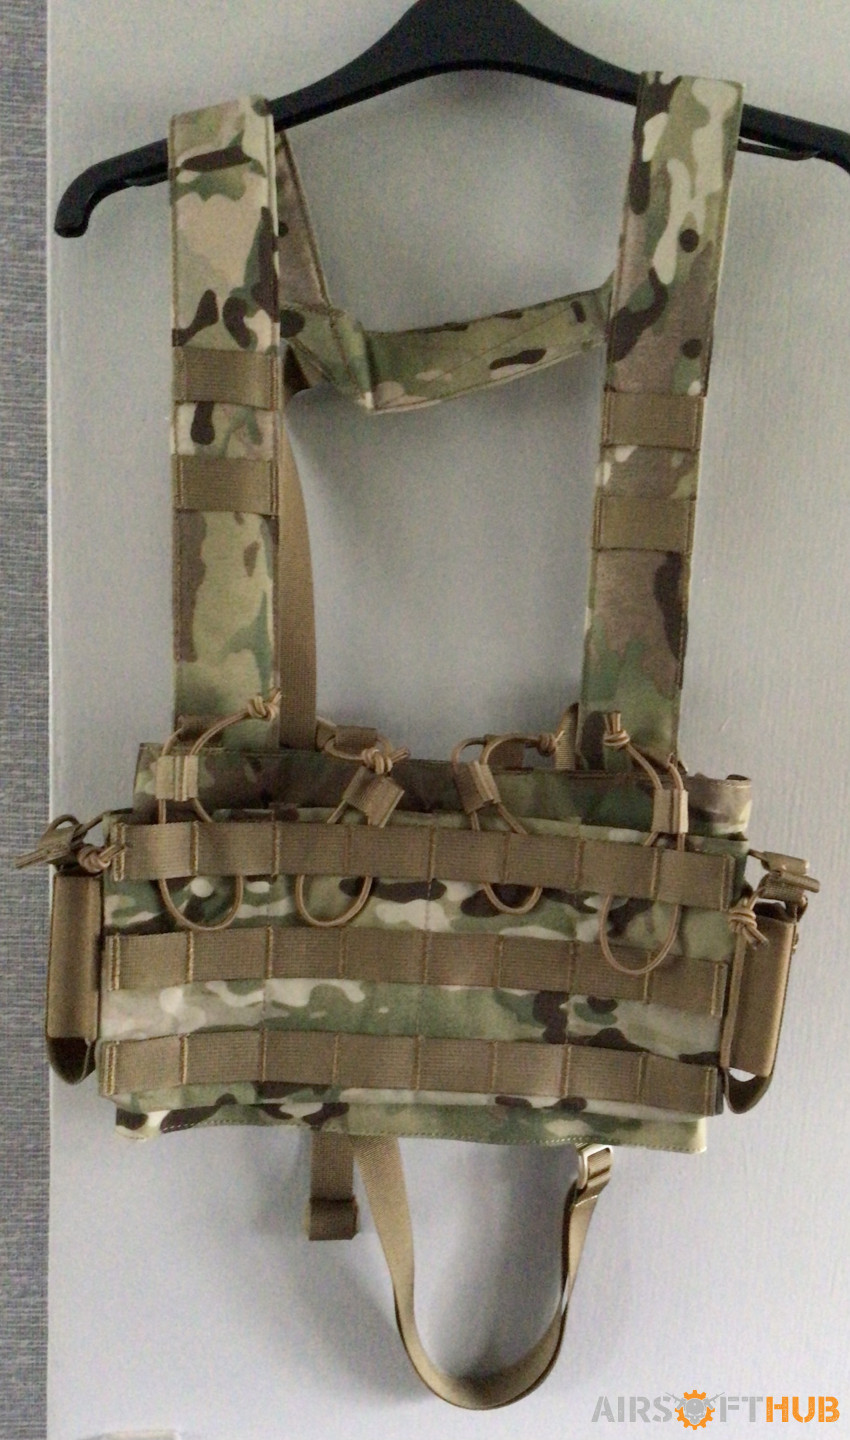 Onetigris chest rig - Used airsoft equipment